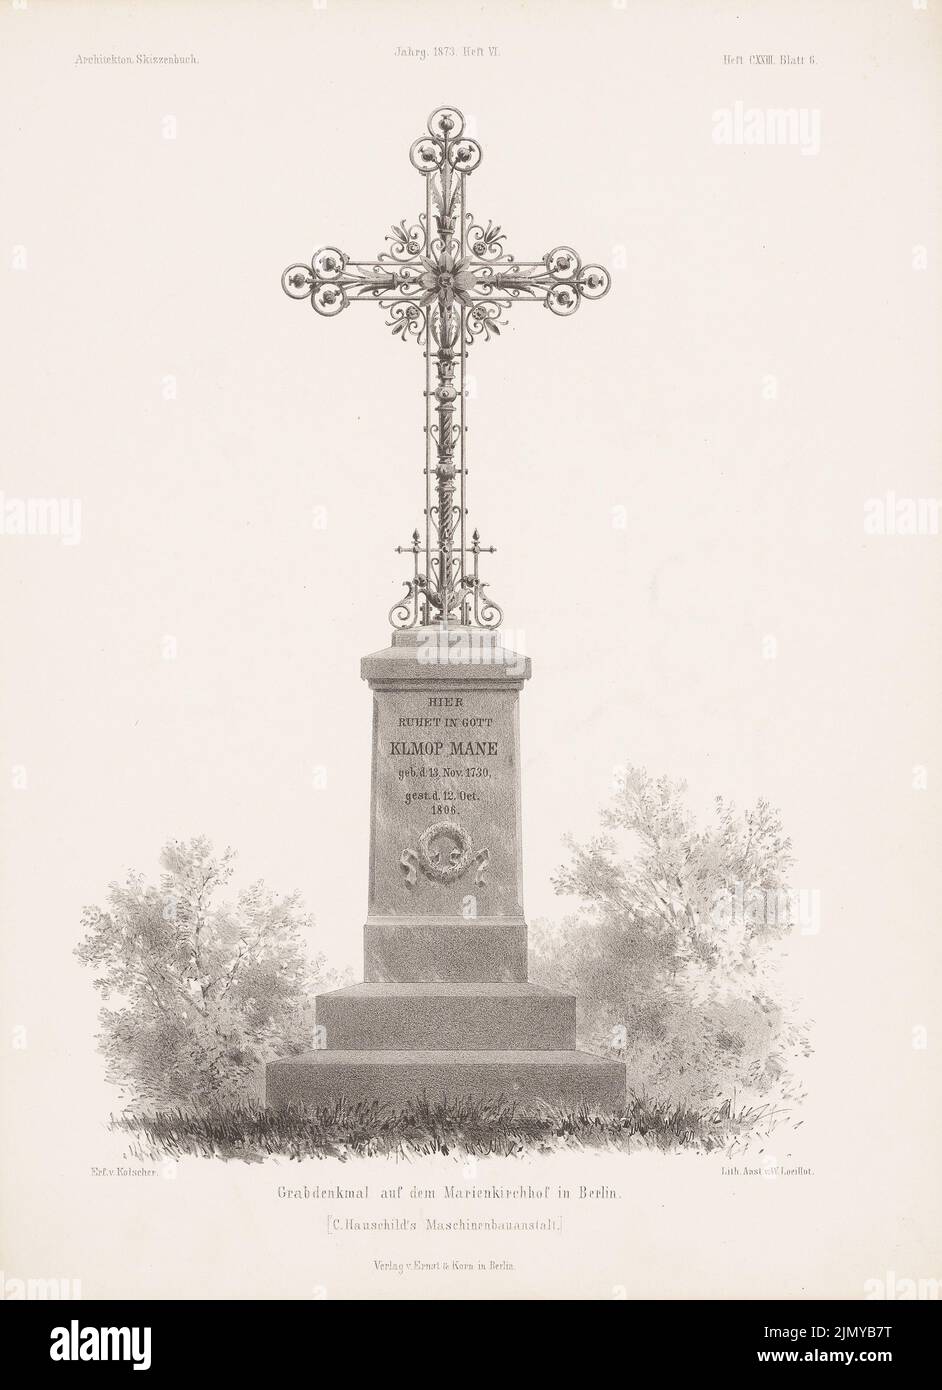 Kolscher Bernhard (1834-1868), grave monument at the Marienkirchhof, Berlin. (From: Architectural sketchbook, H. 123/6, 1873.) (1873-1873): View. Stitch on paper, 34.6 x 25.1 cm (including scan edges) Stock Photo